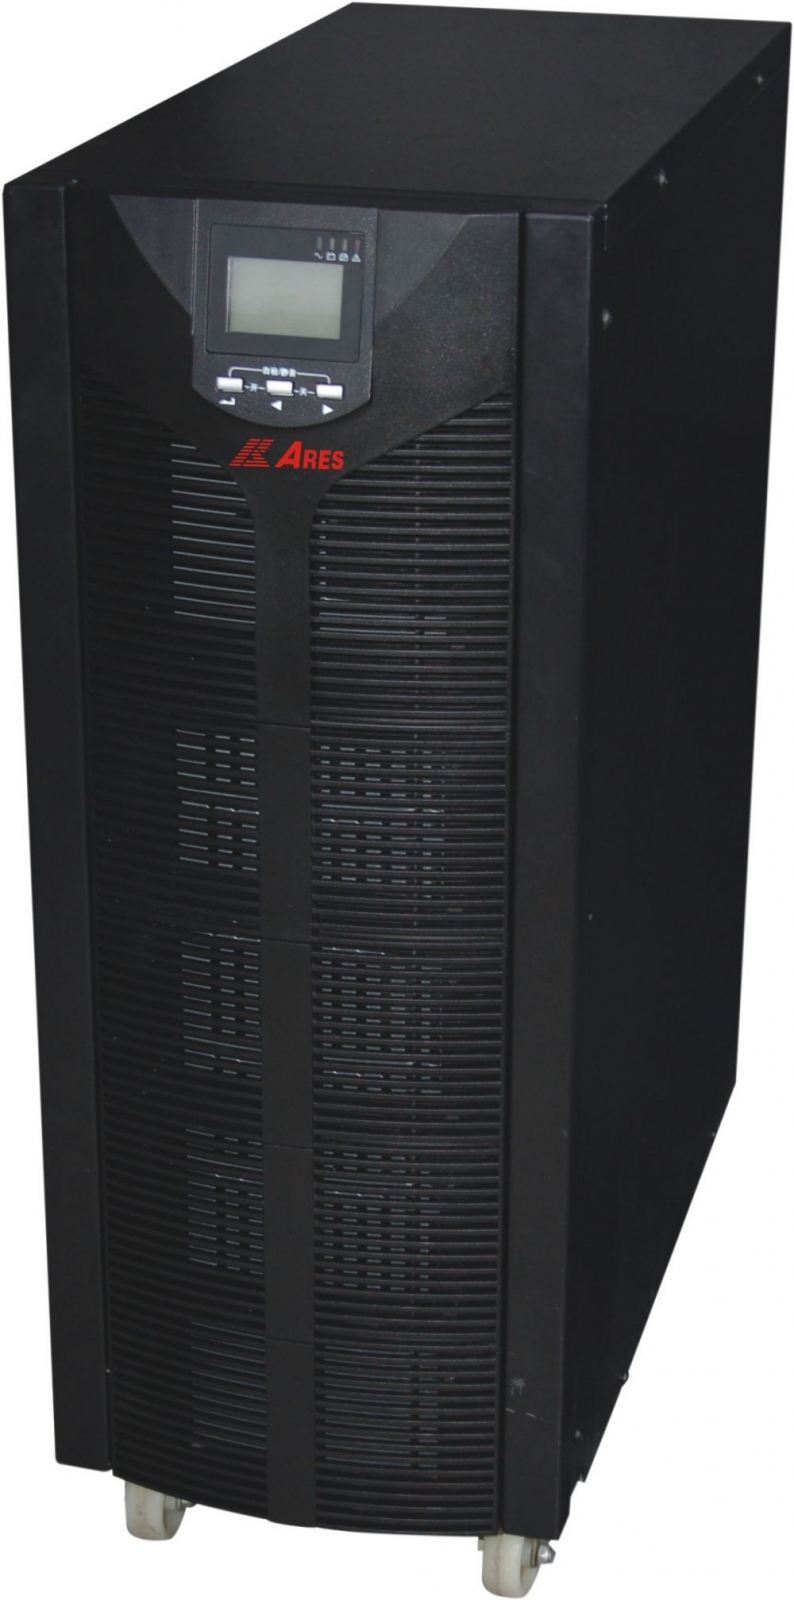 UPS 6KVA Ares AR906II (5400w) Online Tower